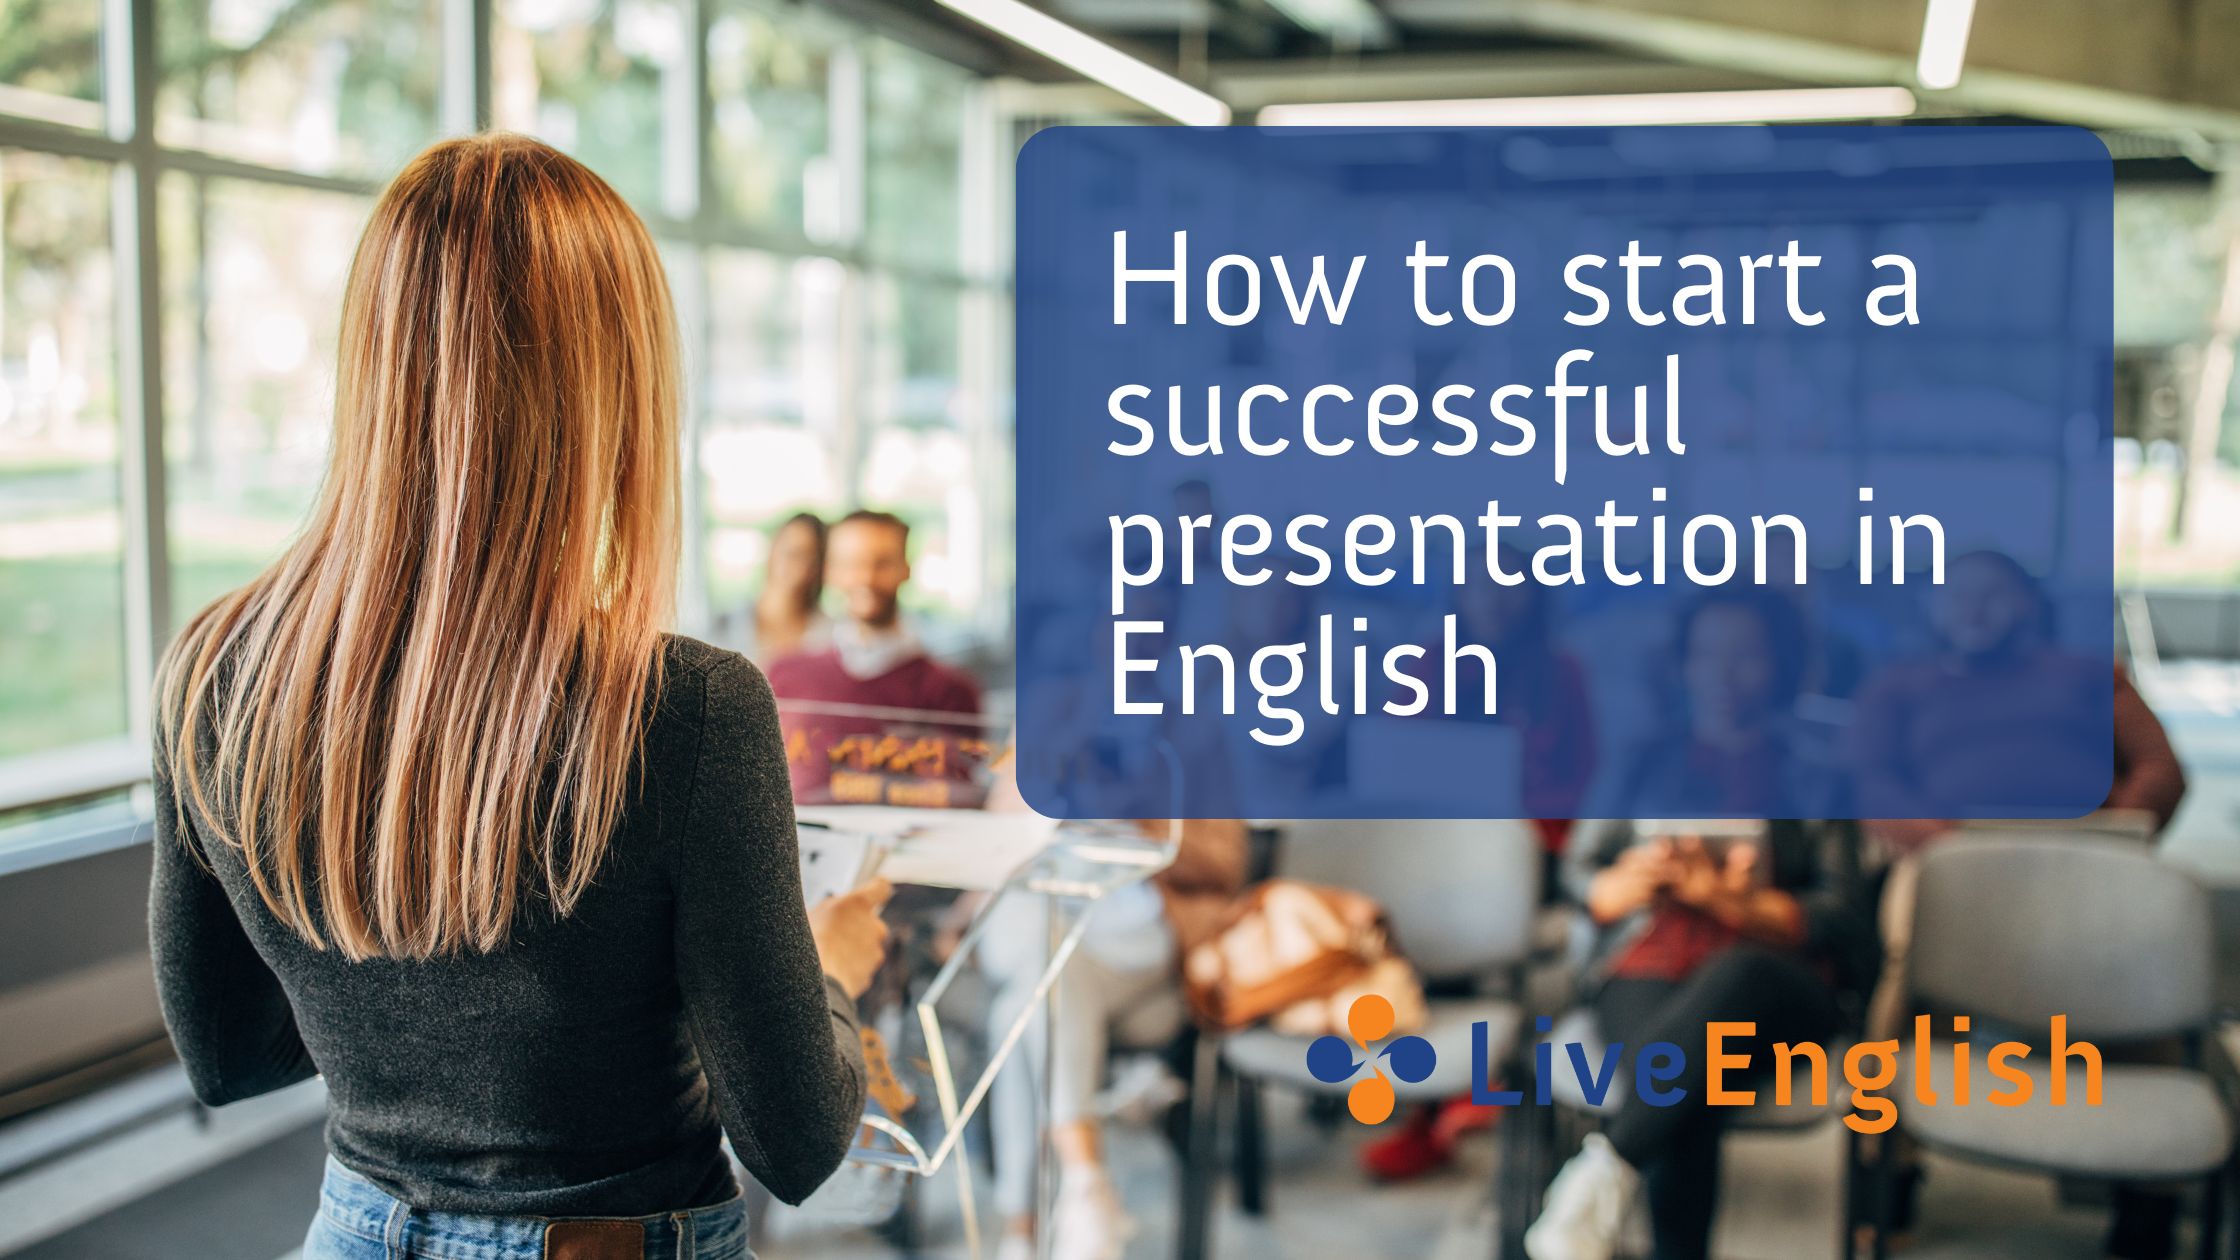 how to start presentation in english for students